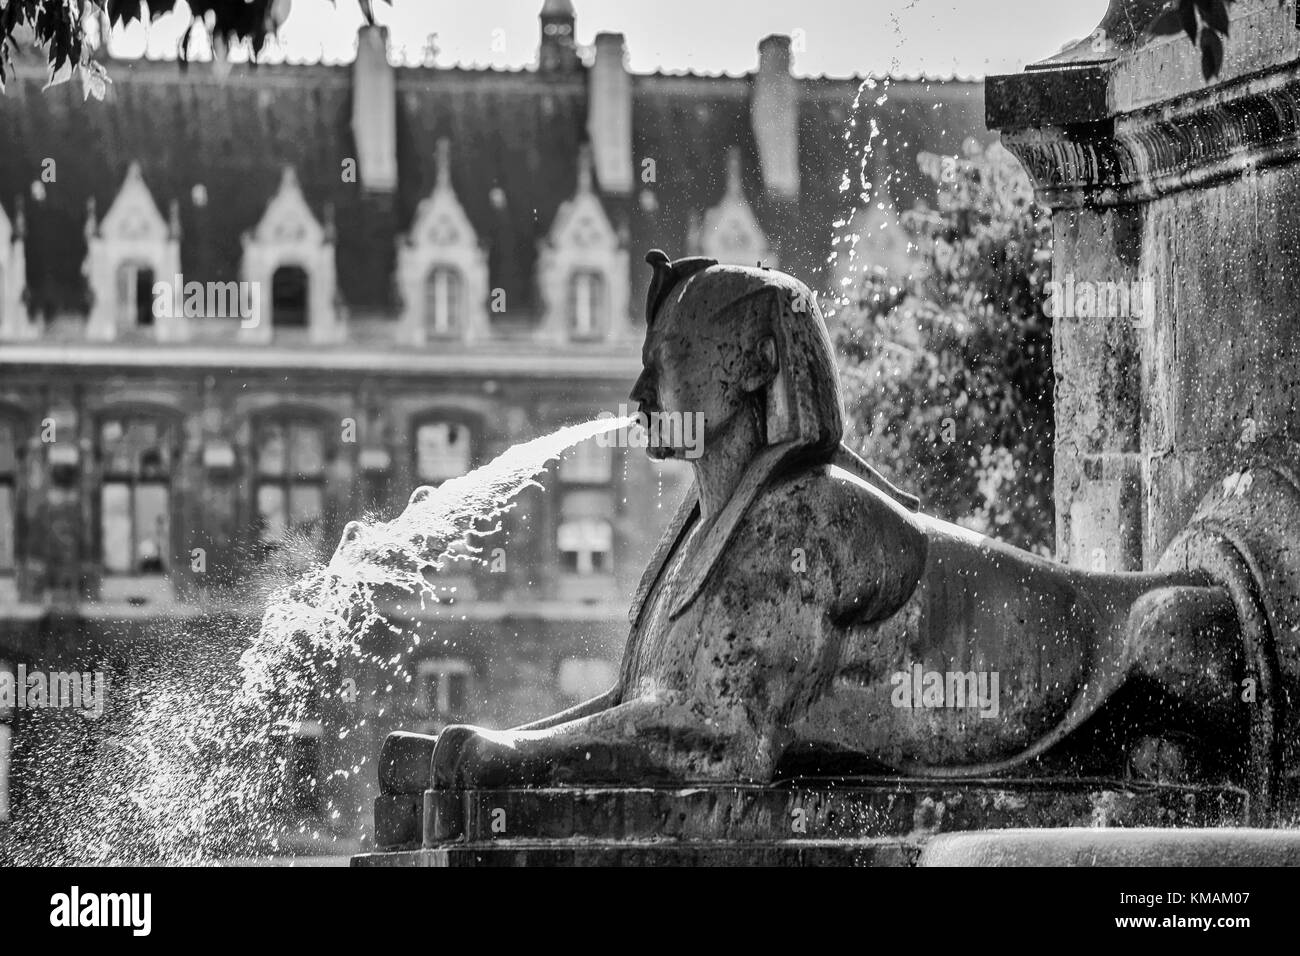 Waterfountain in Paris with sfinx spouting water in black and white Stock Photo